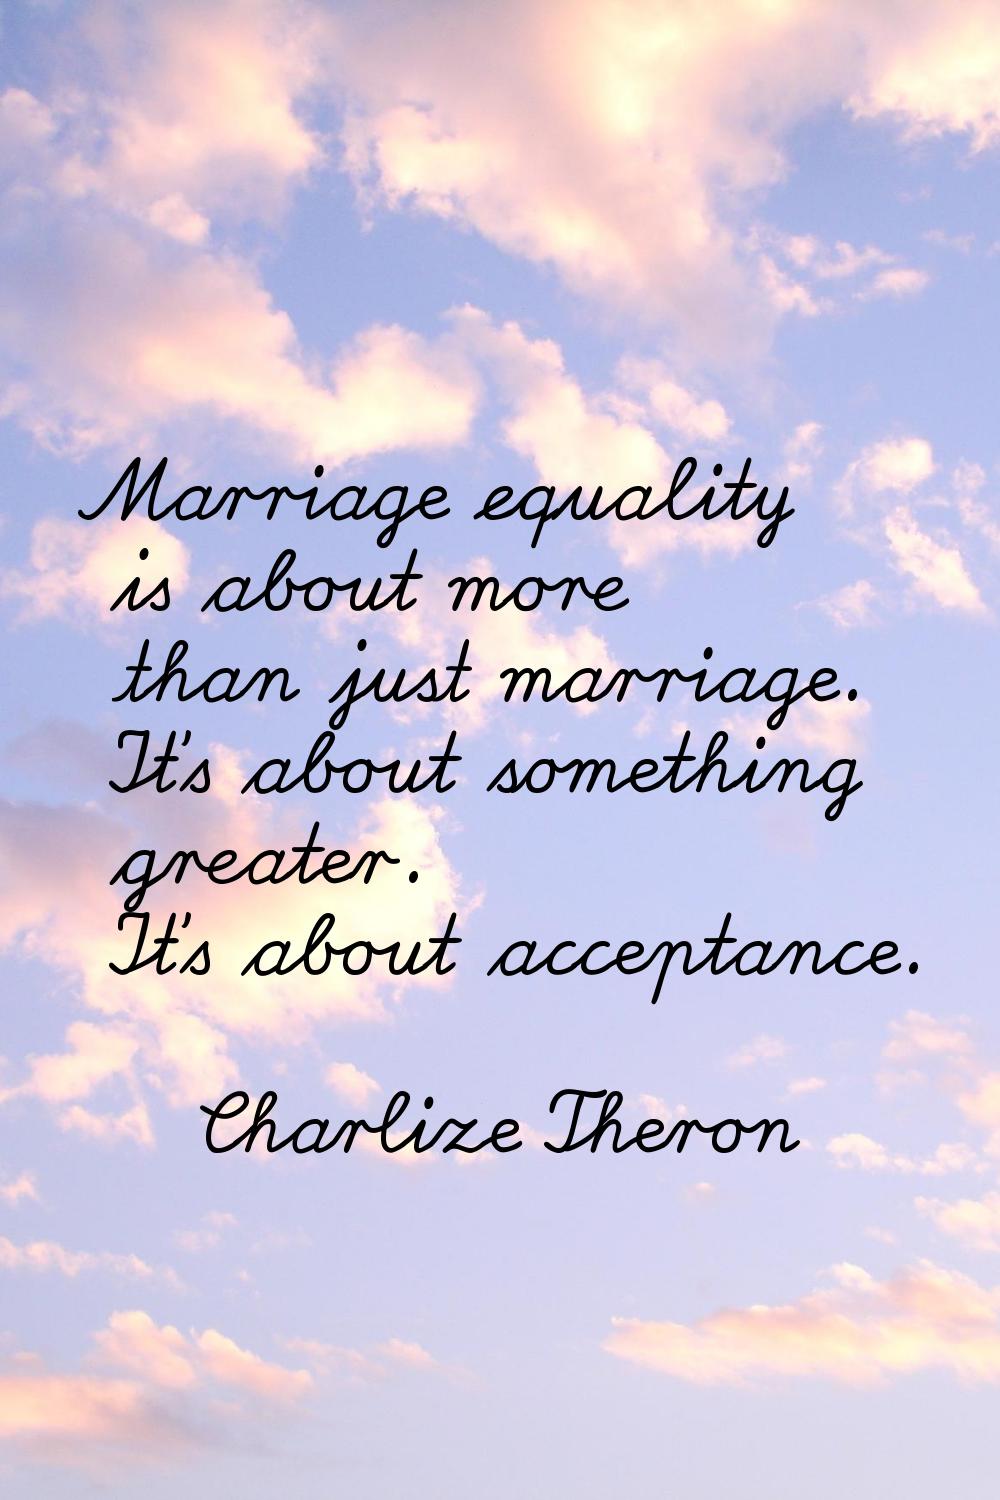 Marriage equality is about more than just marriage. It's about something greater. It's about accept